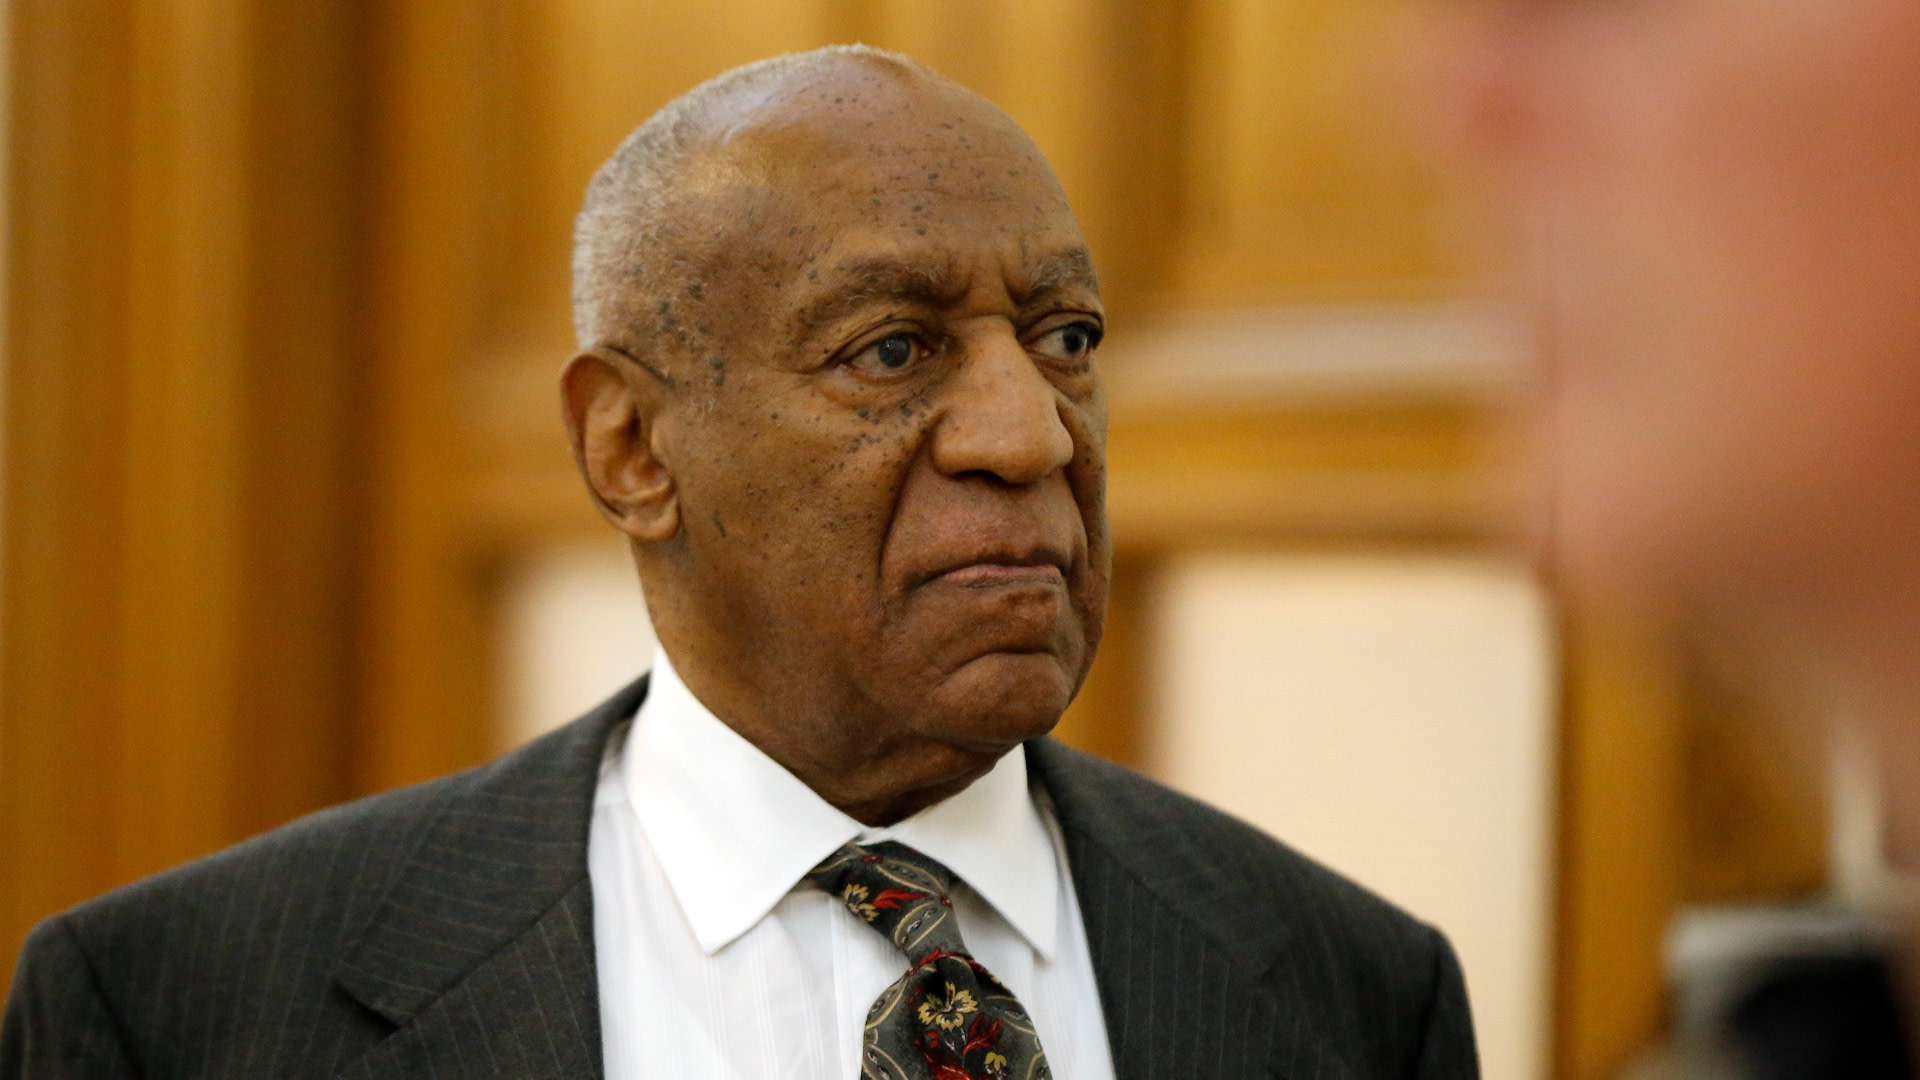 Bill Cosby Faces Sexual